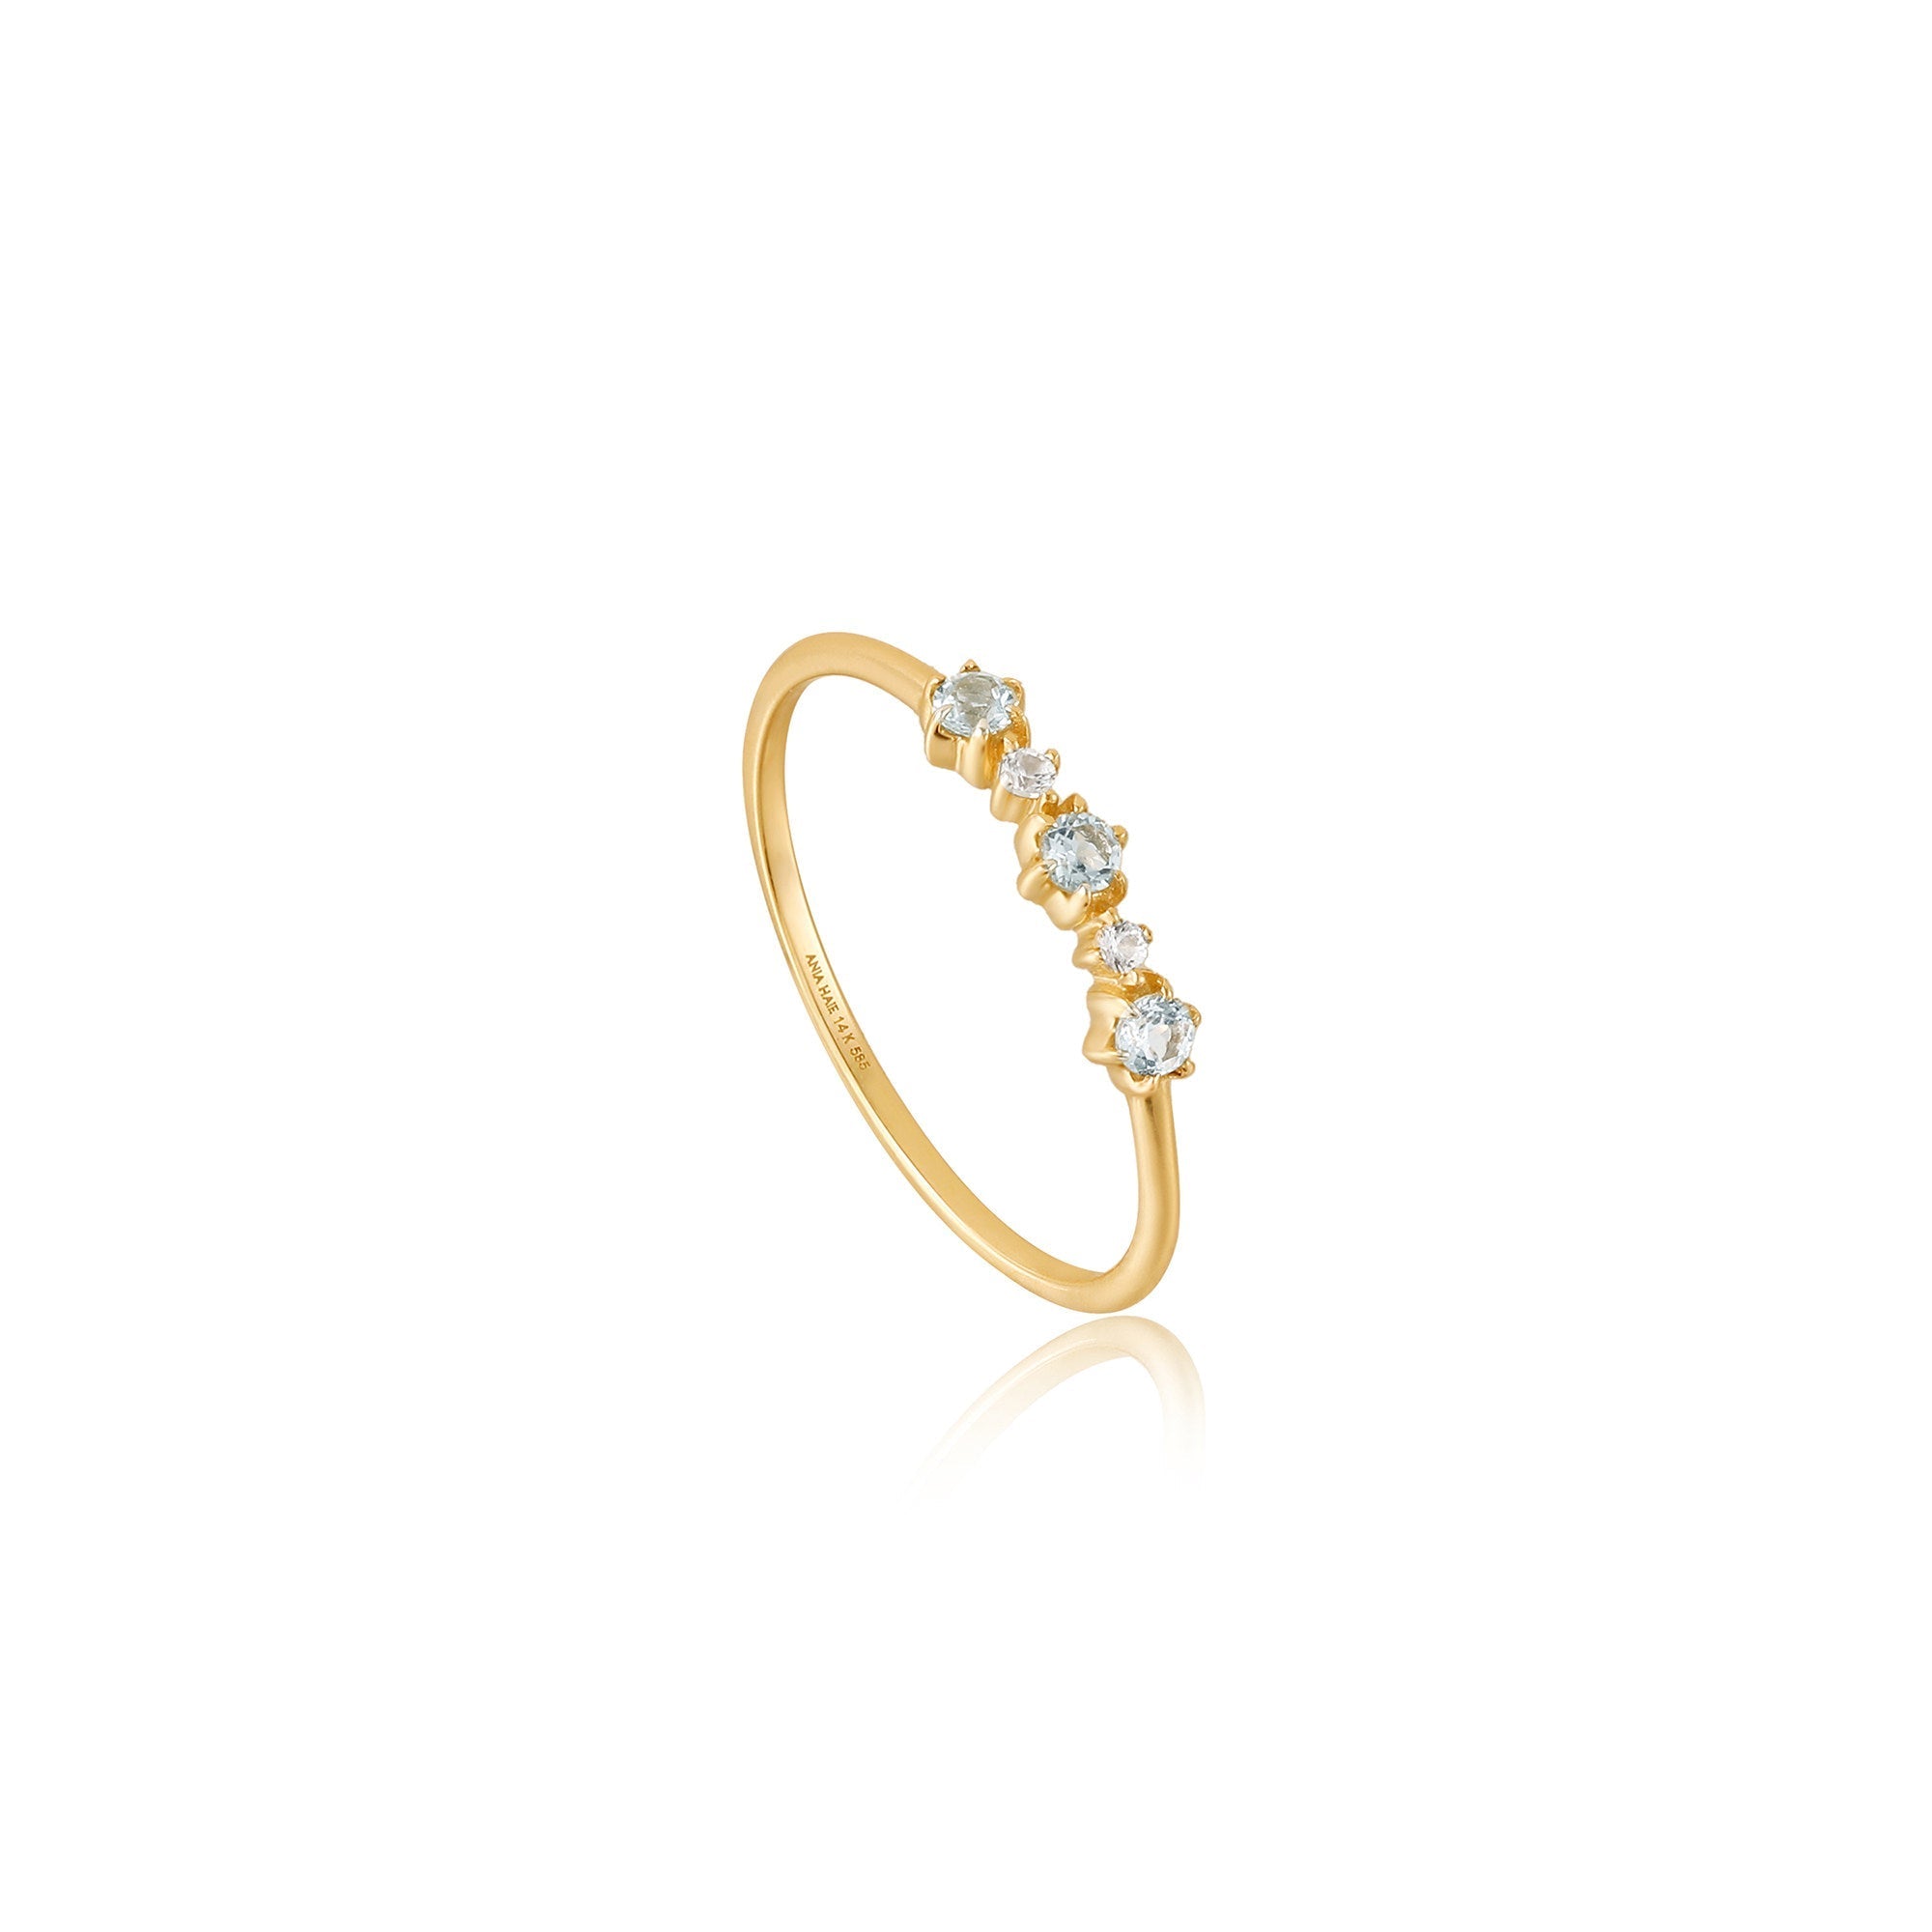 14kt Gold Ring | The Jewellery Boutique